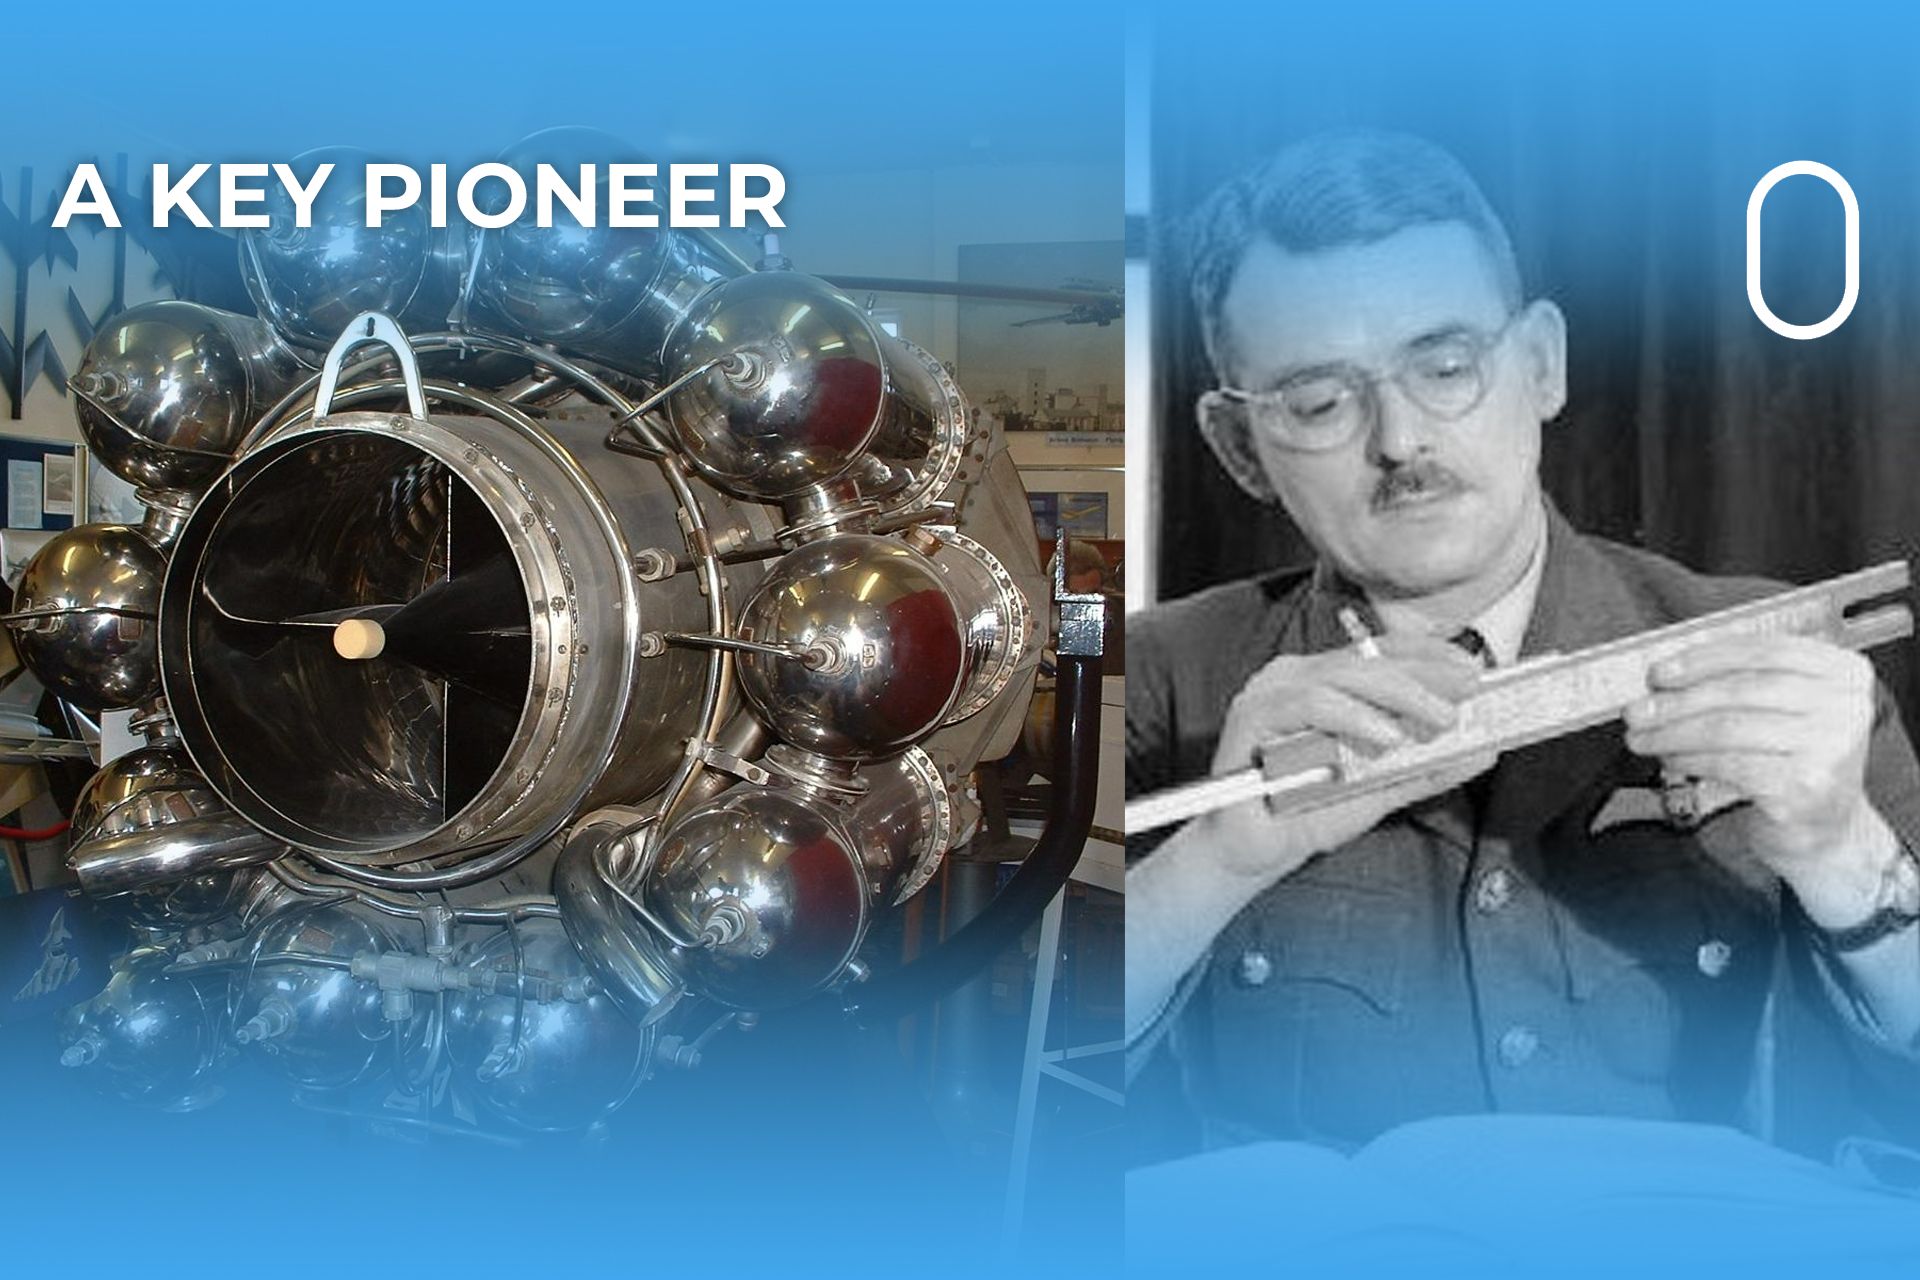 Sir Frank Whittle: The Life & Times Of The Father Of The Turbojet Engine